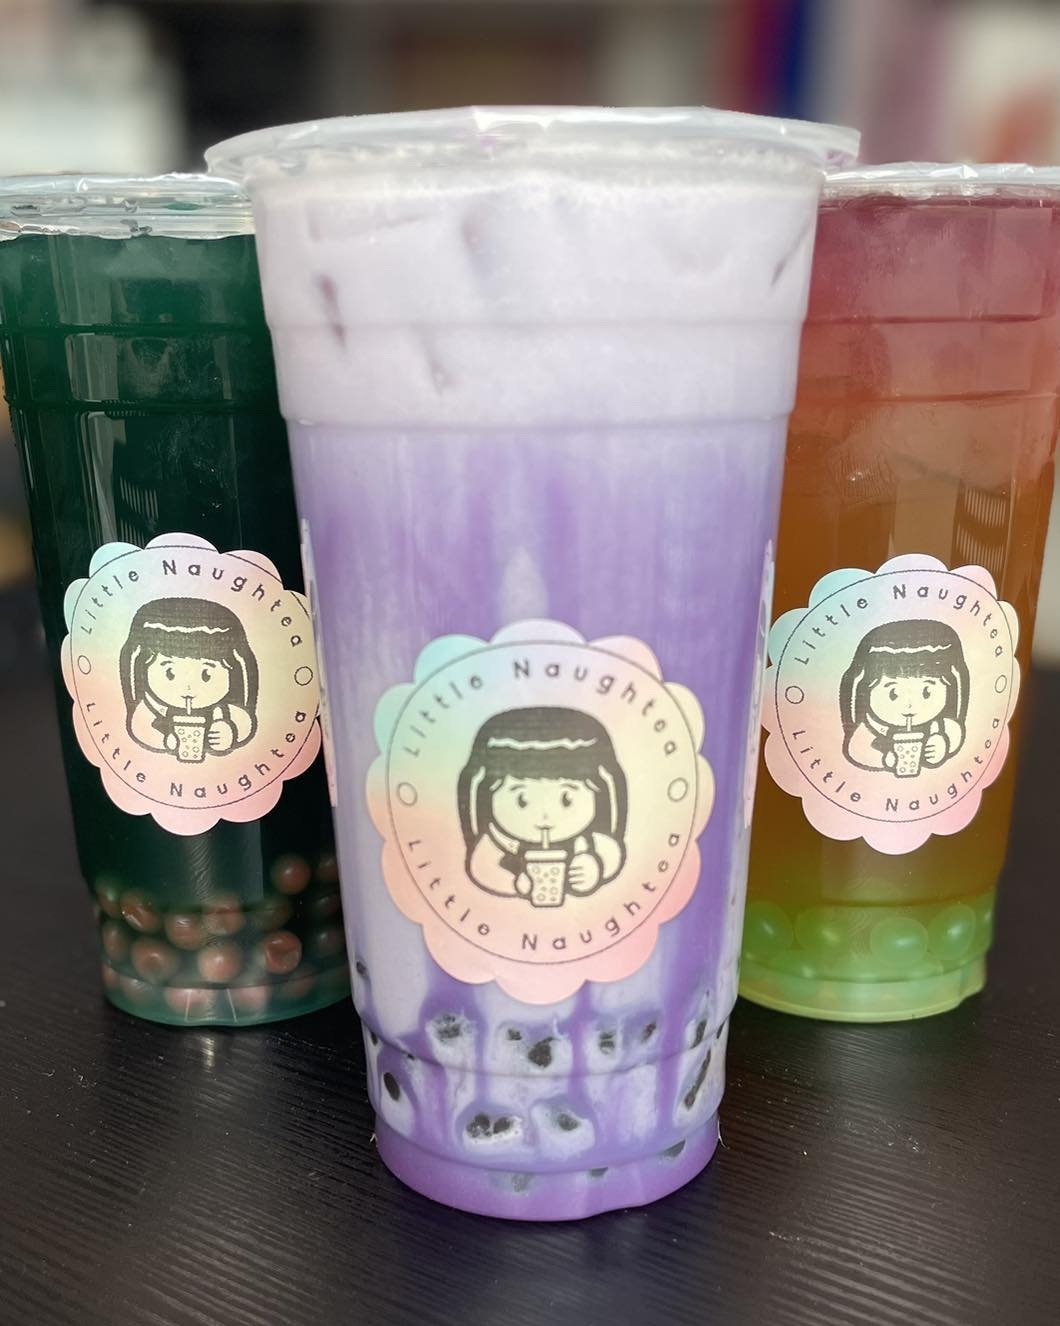 Got some new ingredients thought we&rsquo;d have a play around with bubble teas 🧋.

Shrek&rsquo;s bubble tea 🧋 
Traffic light 🚥 bubble tea 🧋 
Dirty Taro bubble tea 🧋 

#bubbletea #bubbleteaaddict #leeonthesolent #littlenaughtea #bubbletealover #